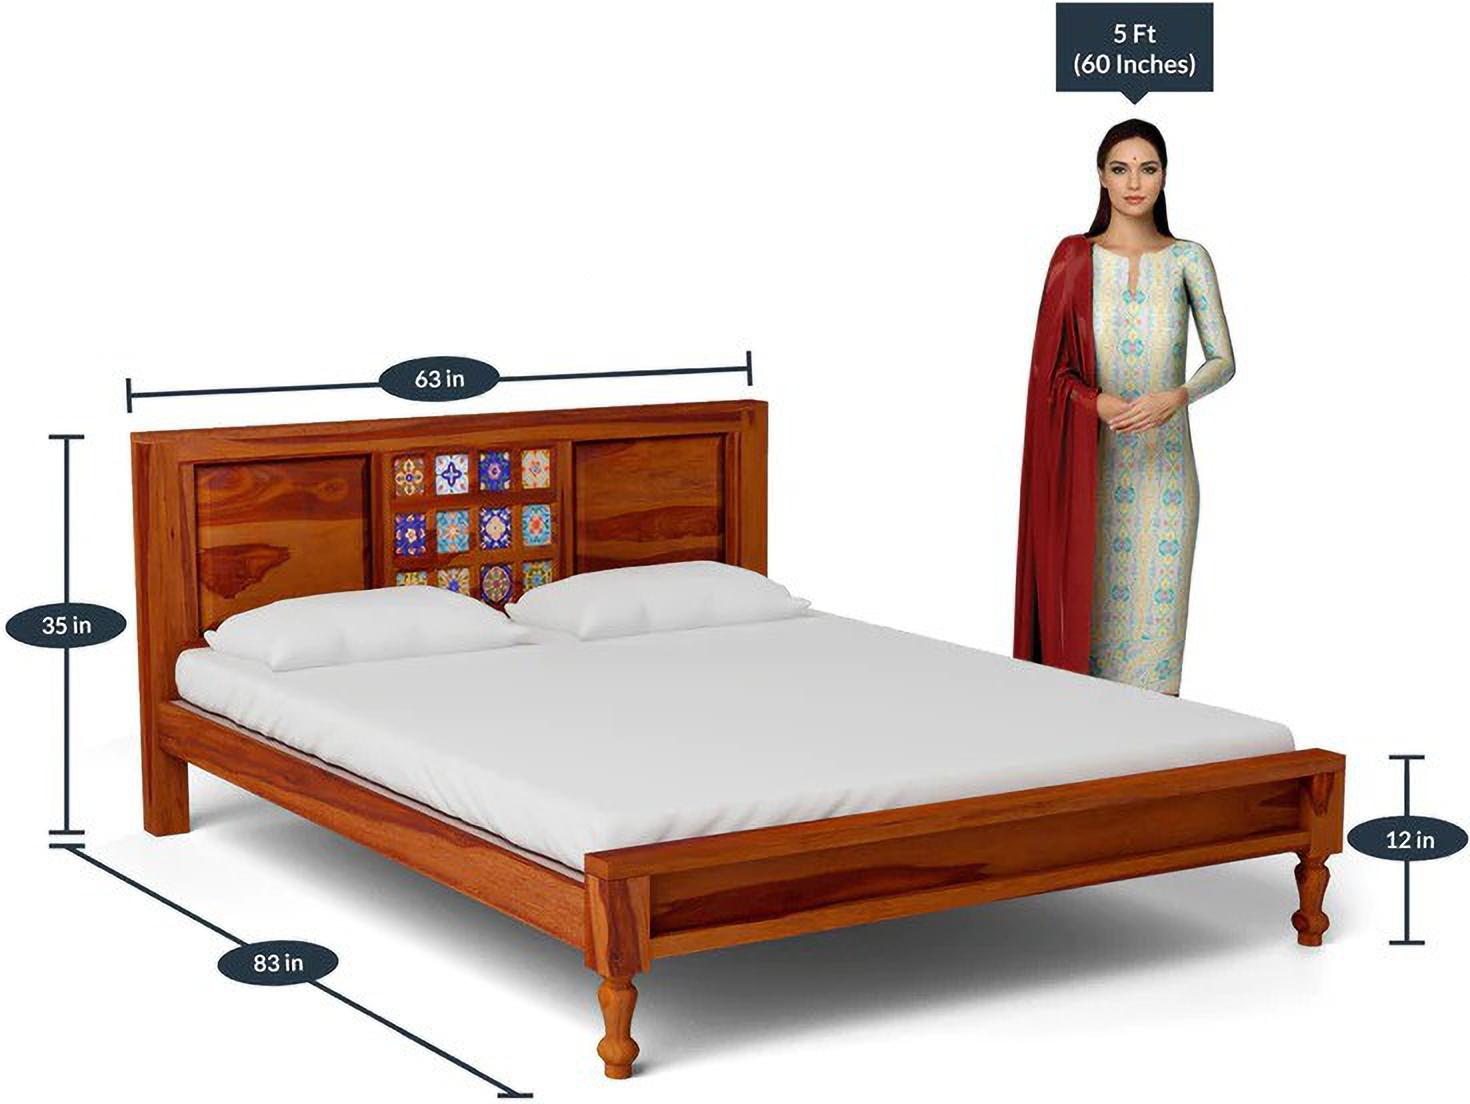 Aaram By Zebrs Solid Wood Queen Bed (Finish Color - Honey Oak, Delivery Condition - DIY(Do-It-Yourself))